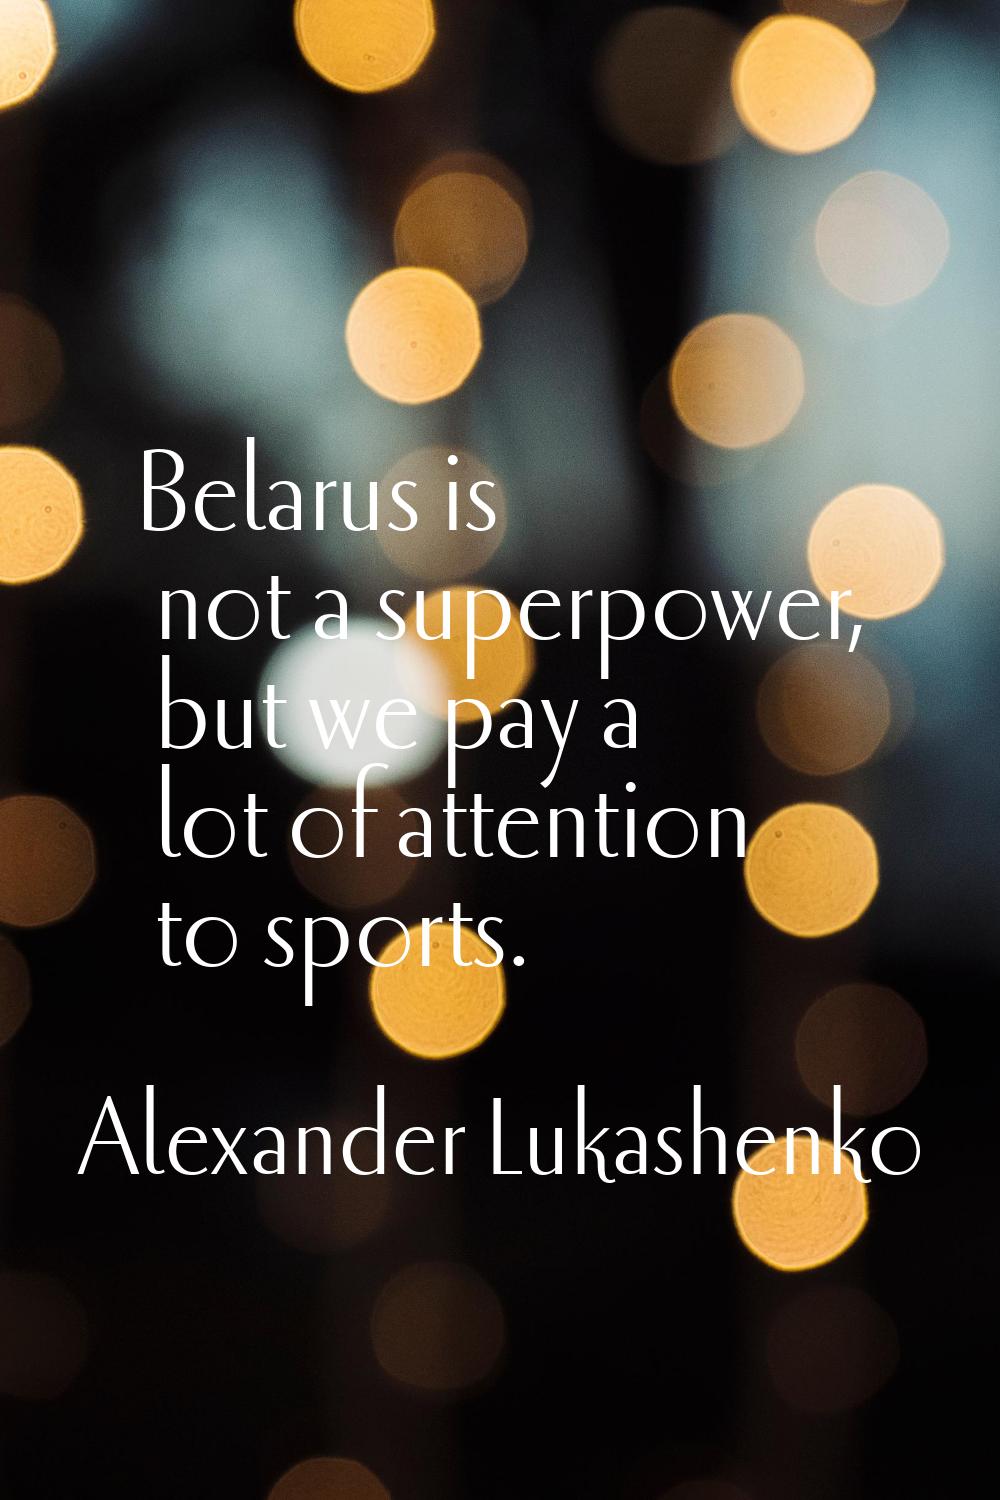 Belarus is not a superpower, but we pay a lot of attention to sports.